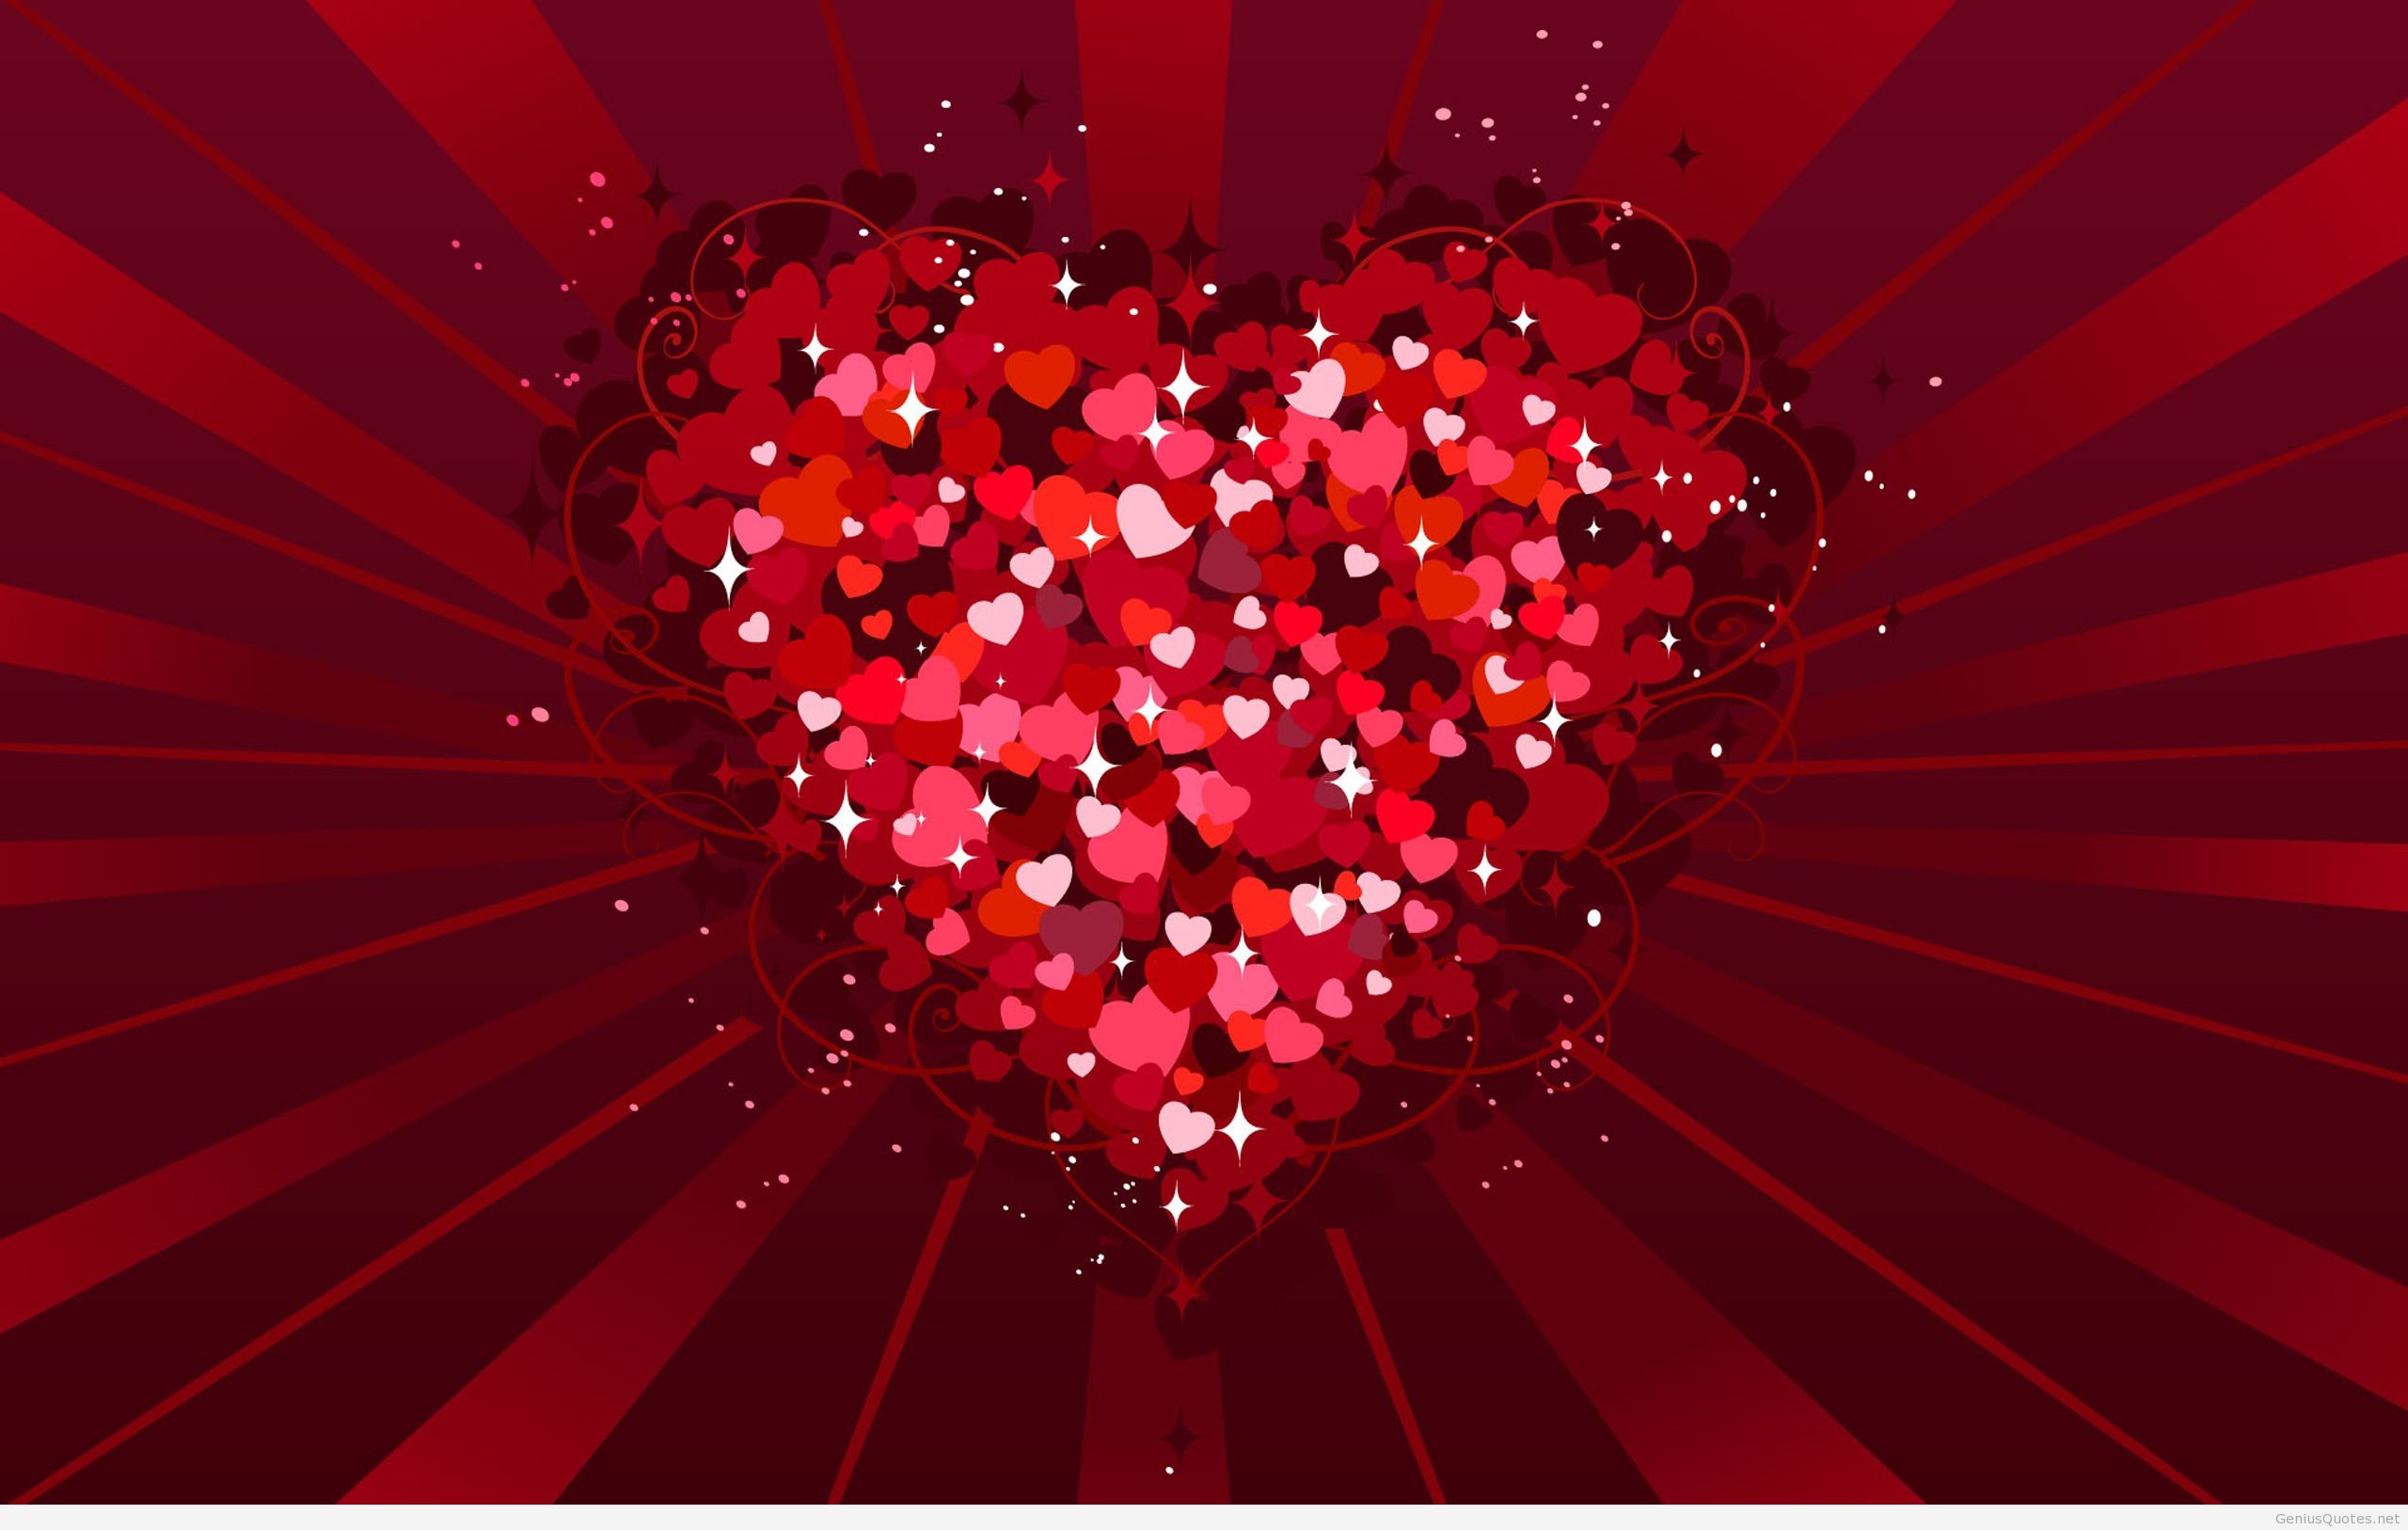 2560x1627 TOP HD WALLPAPERS FOR VALENTINES DAY 14 february 2014 2015